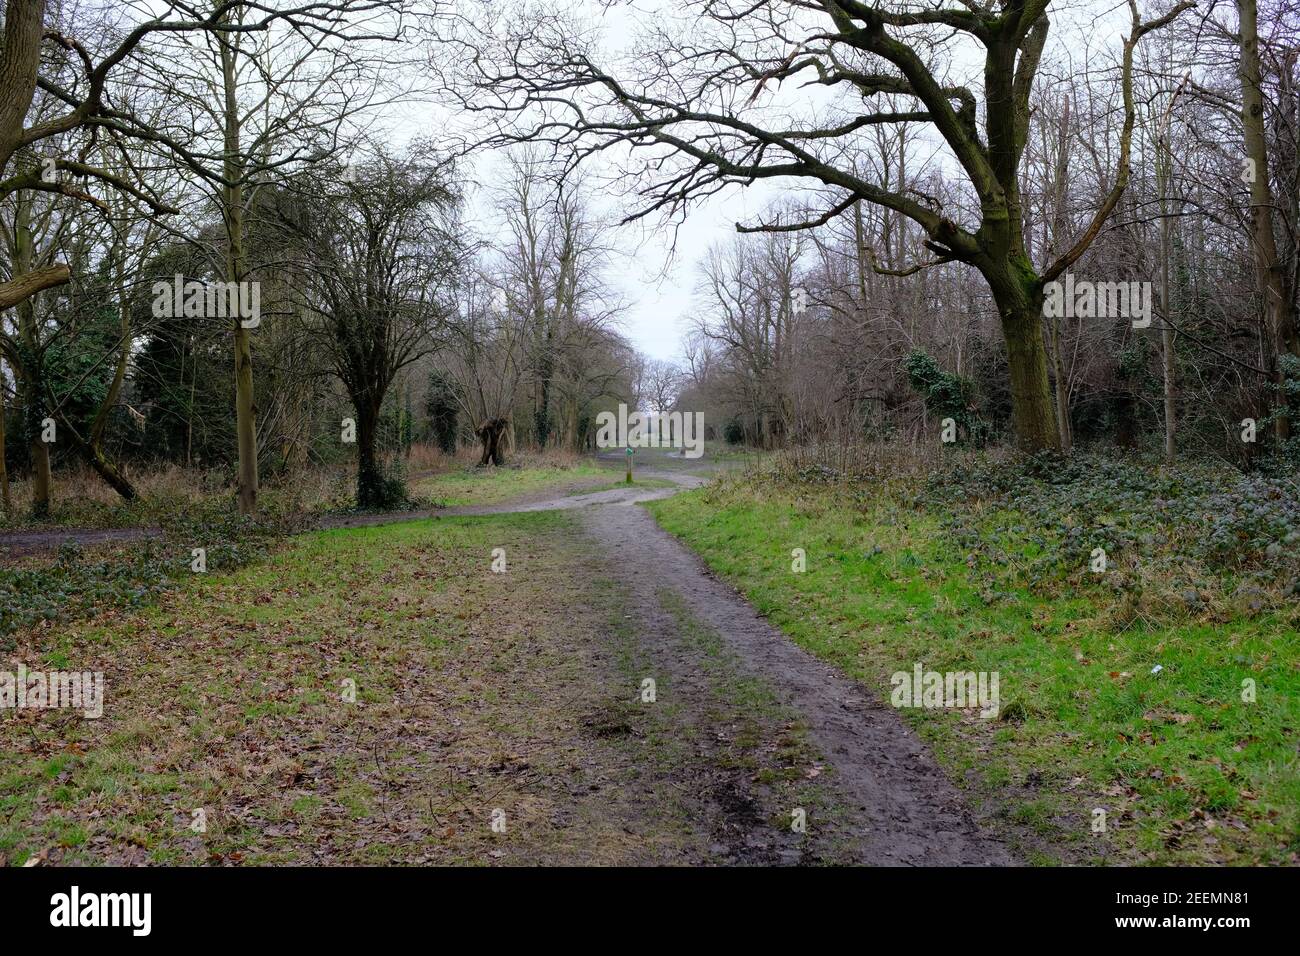 Avenue of trees on Wanstead Flats, running from Ferndale Road in Leytonstone to Bush Wood. This is known as Evelyn's Avenue, planted by John Evelyn. Stock Photo